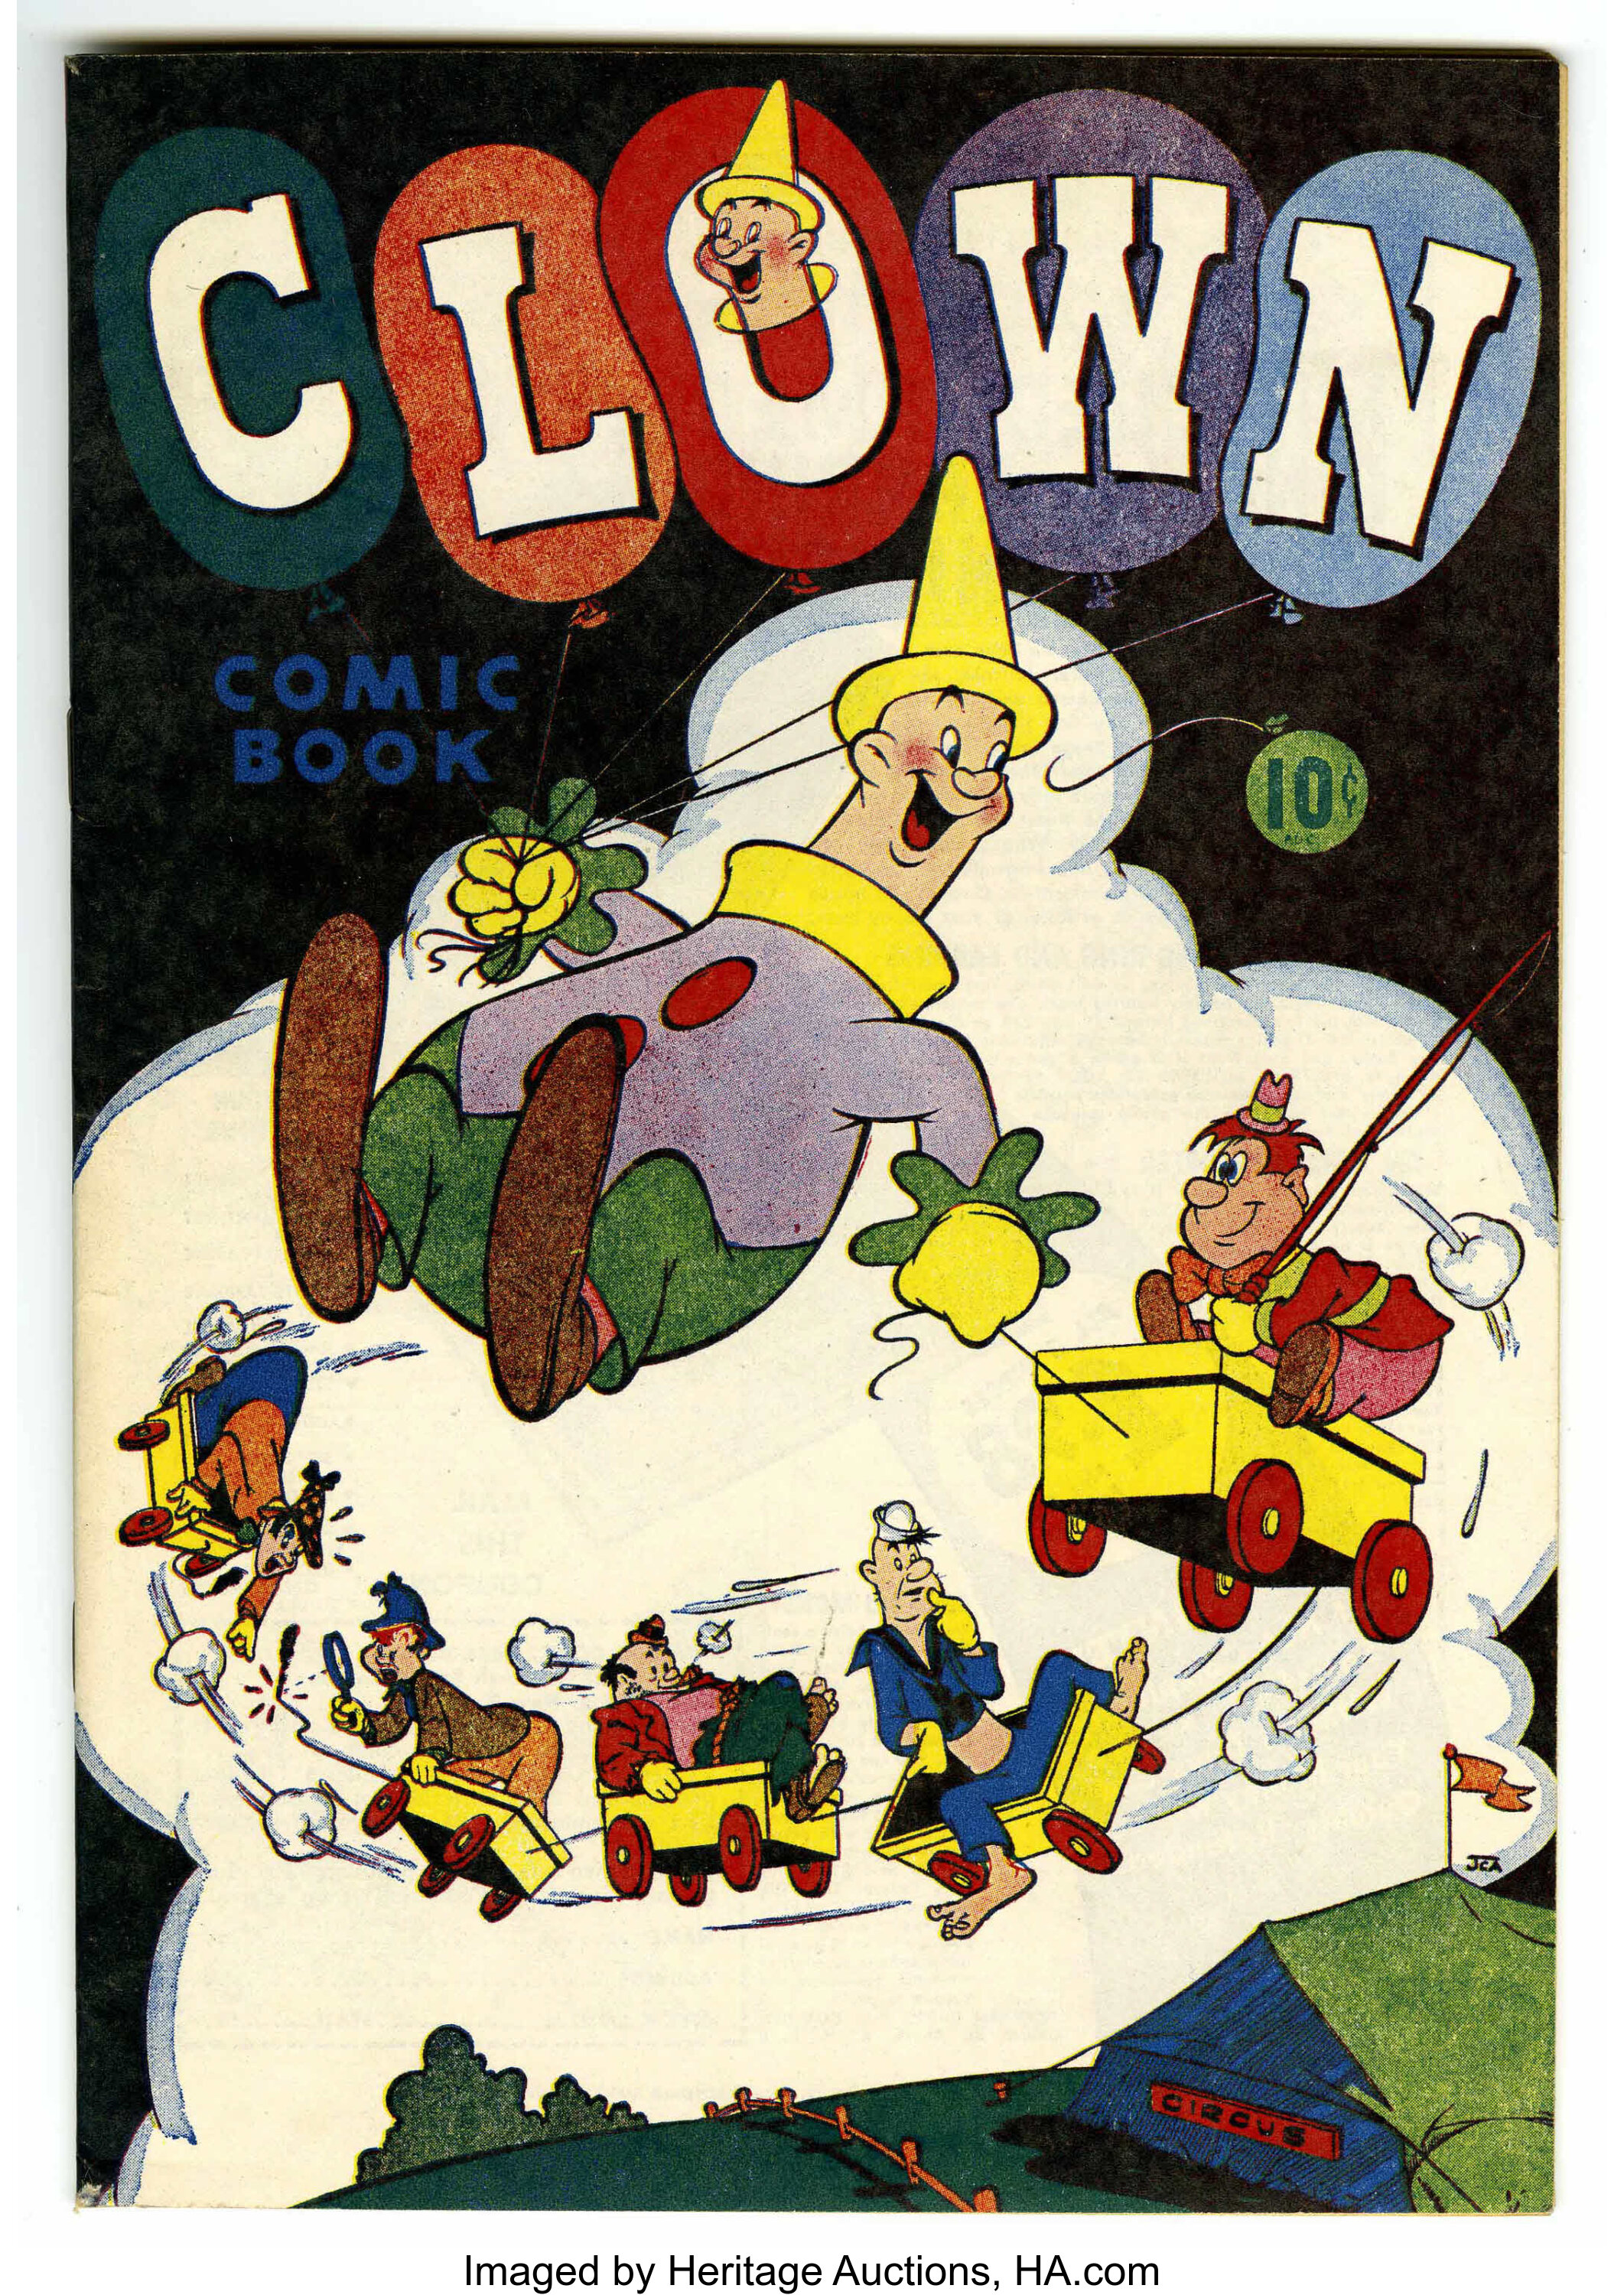 Clown Comics 1 Harvey 1945 Condition Nm This Early Harvey Lot Heritage Auctions